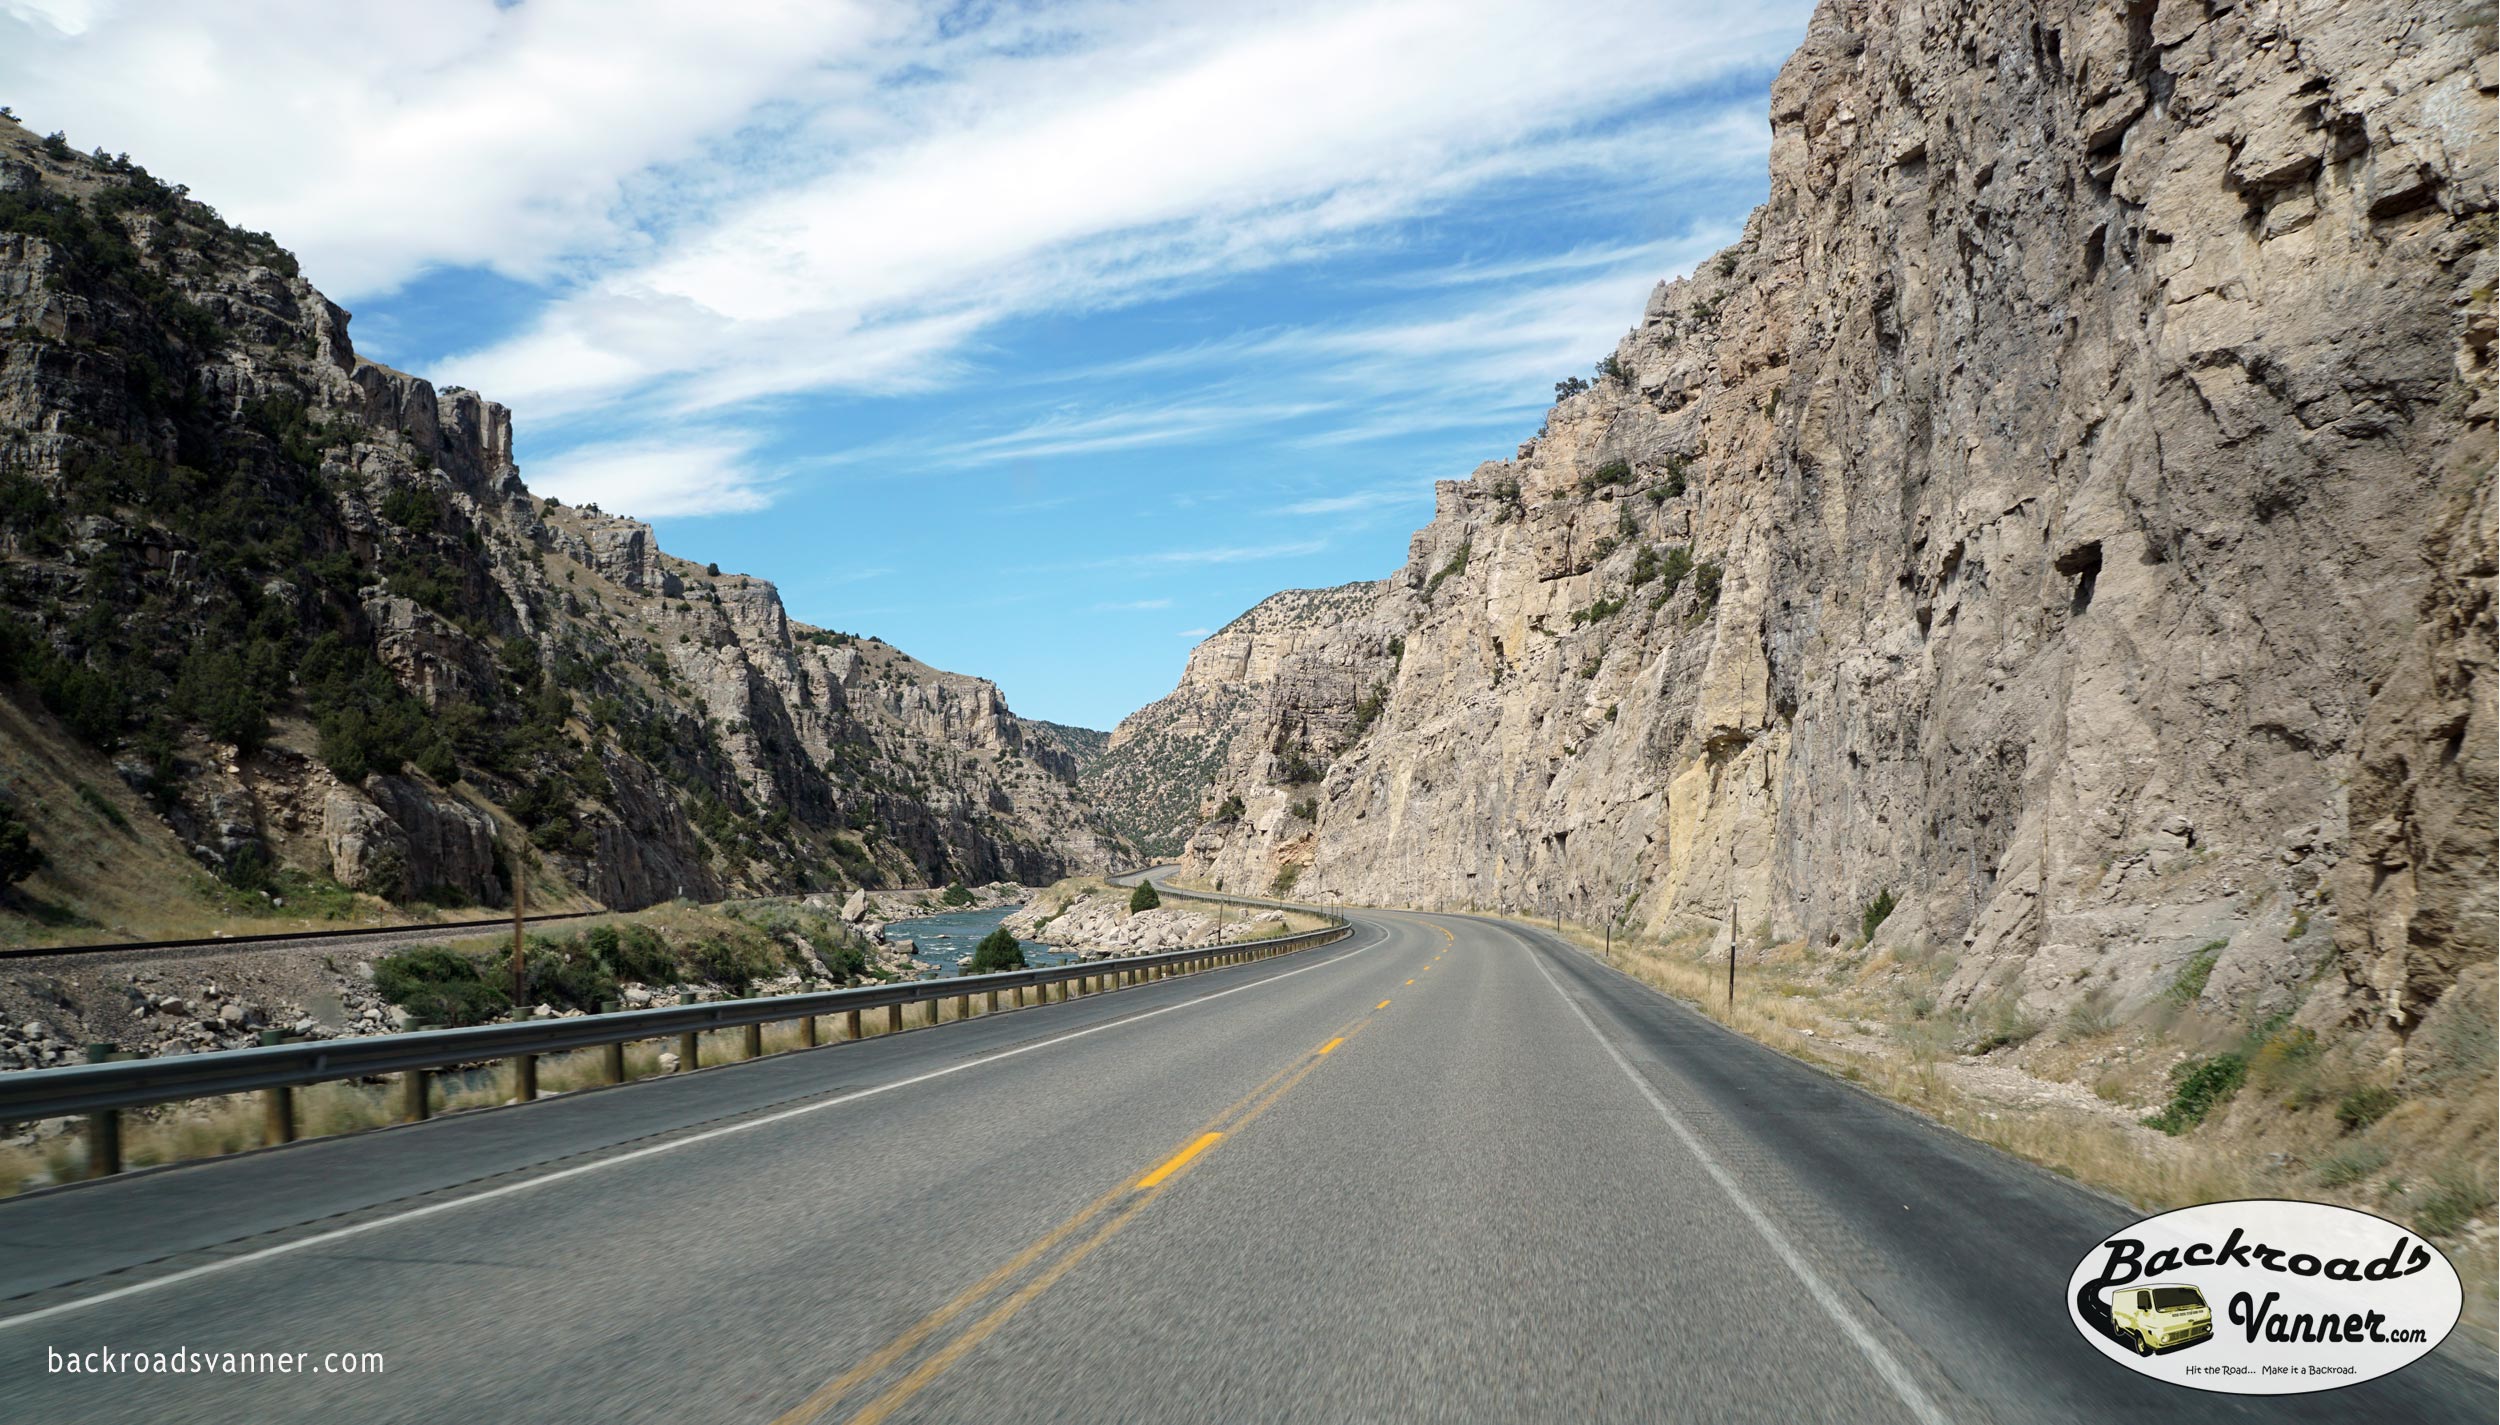 Wind River Canyon Scenic Drive (Wyoming) | BackroadsVanner.com